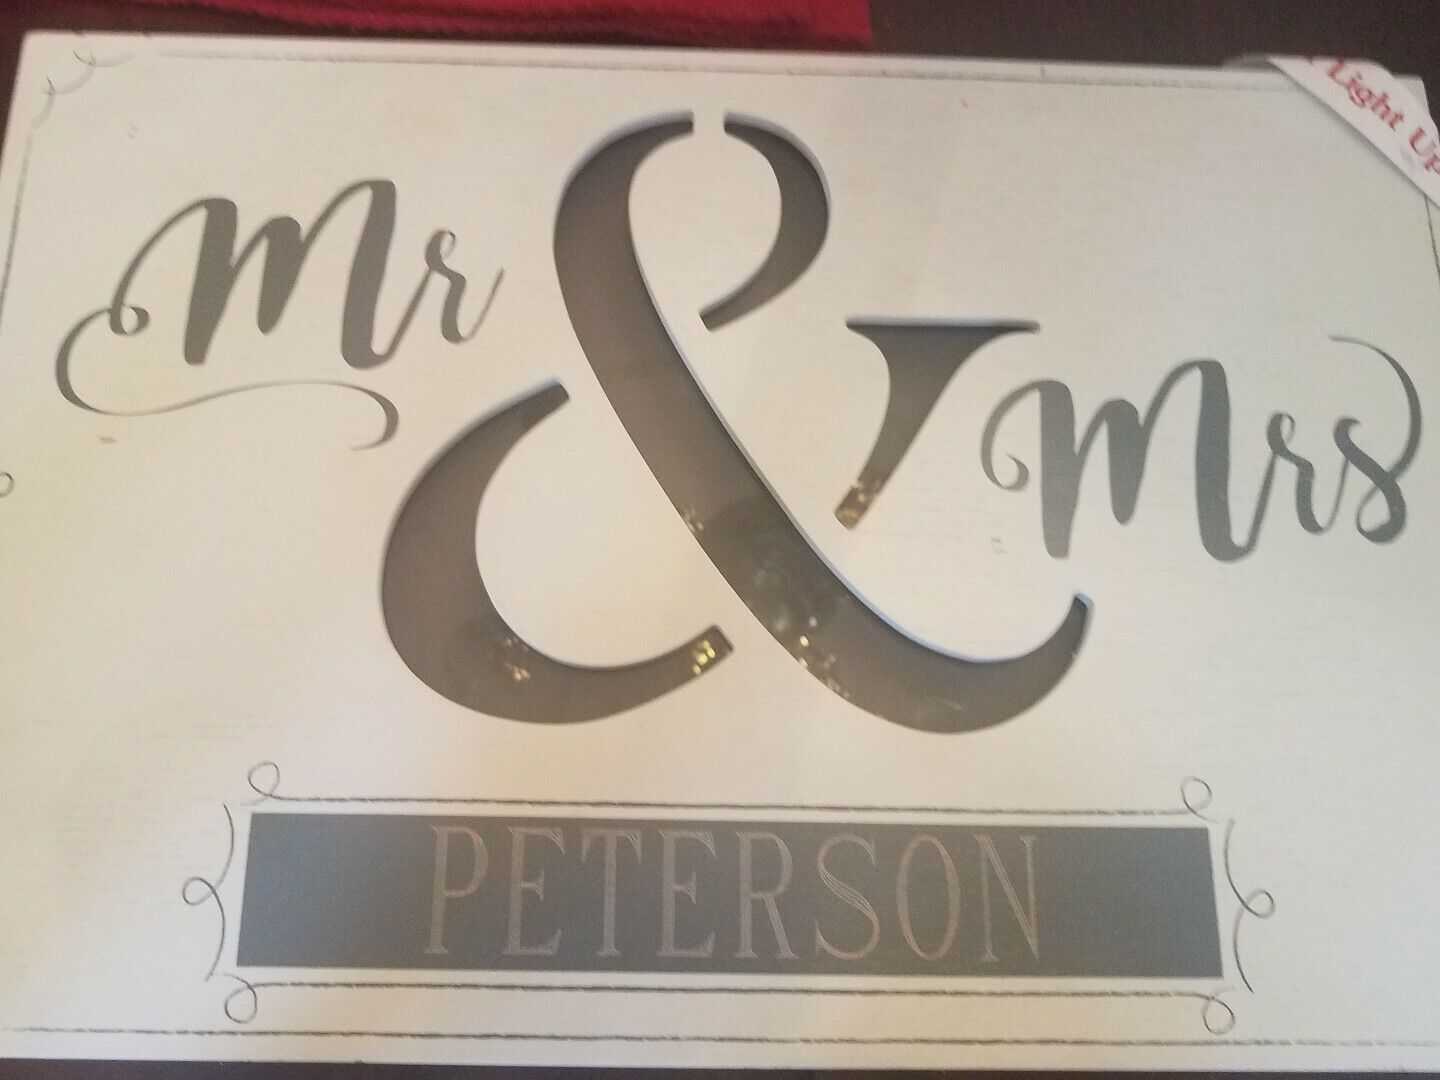 Mr. & Mrs. Peterson Sign Gray and White 18 x 12 light up RARE-SHIPS N 24 HOURS - $186.99